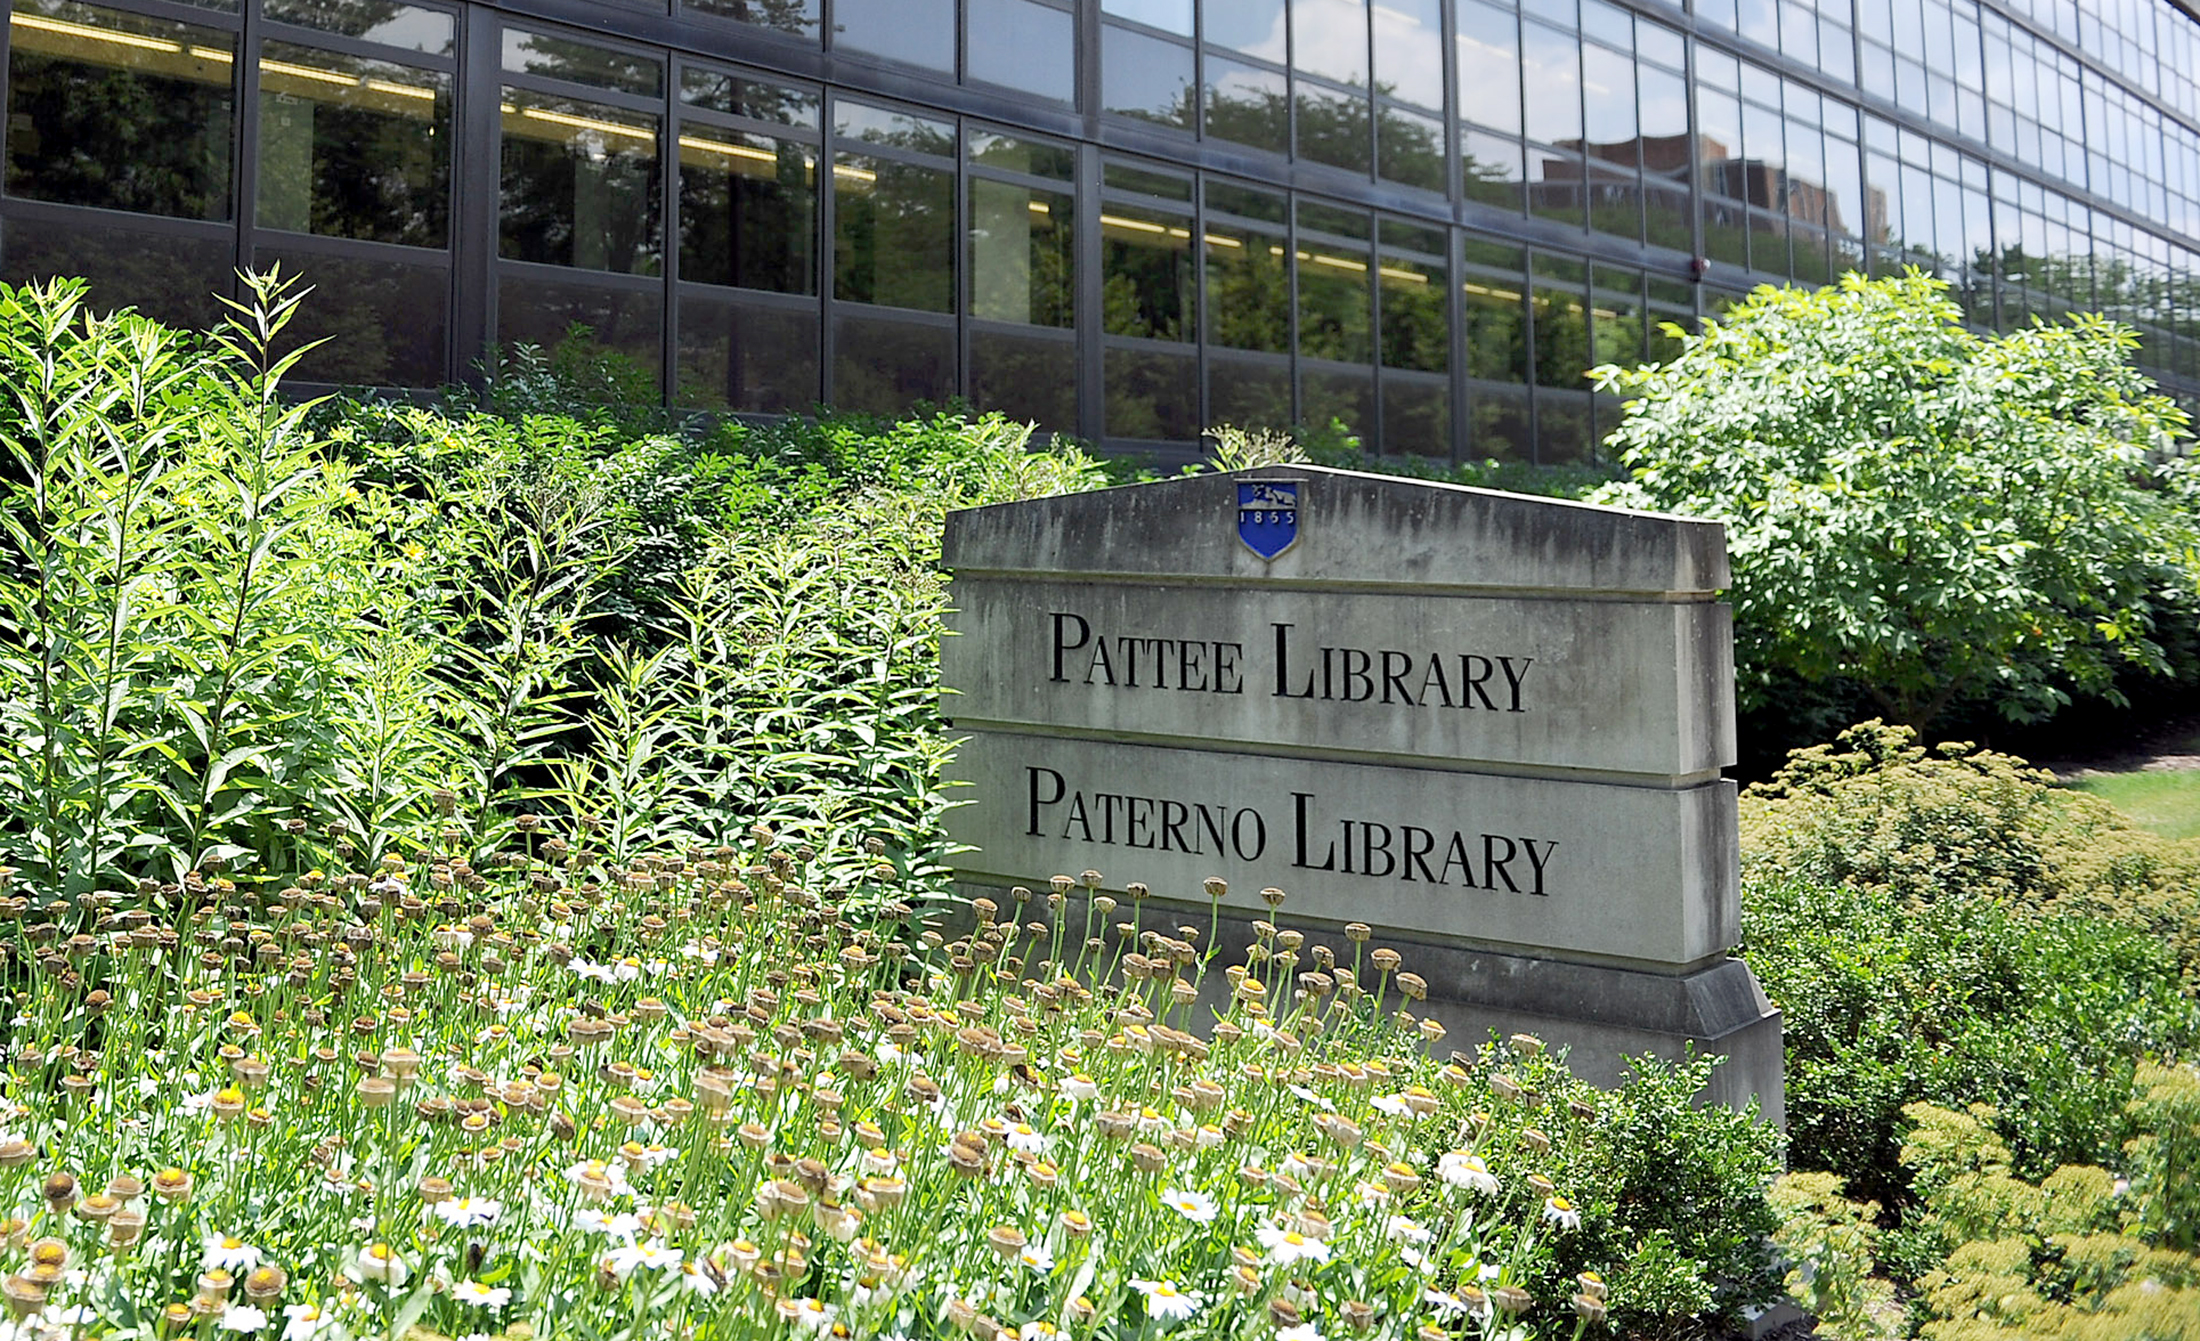 PHOTO: The Pattee and Paterno Library on the campus of Penn State, July 22, 2012 in State College, Pa.